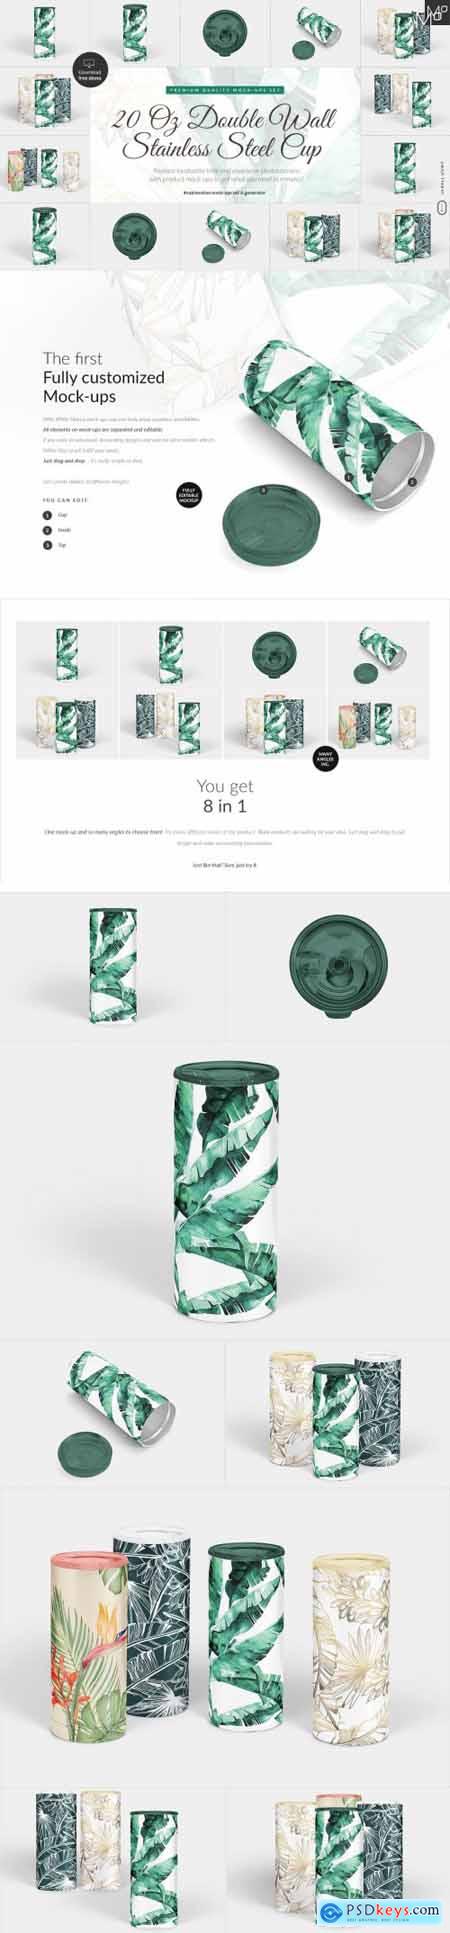 Download Product Mock-ups » page 24 » Free Download Photoshop ...